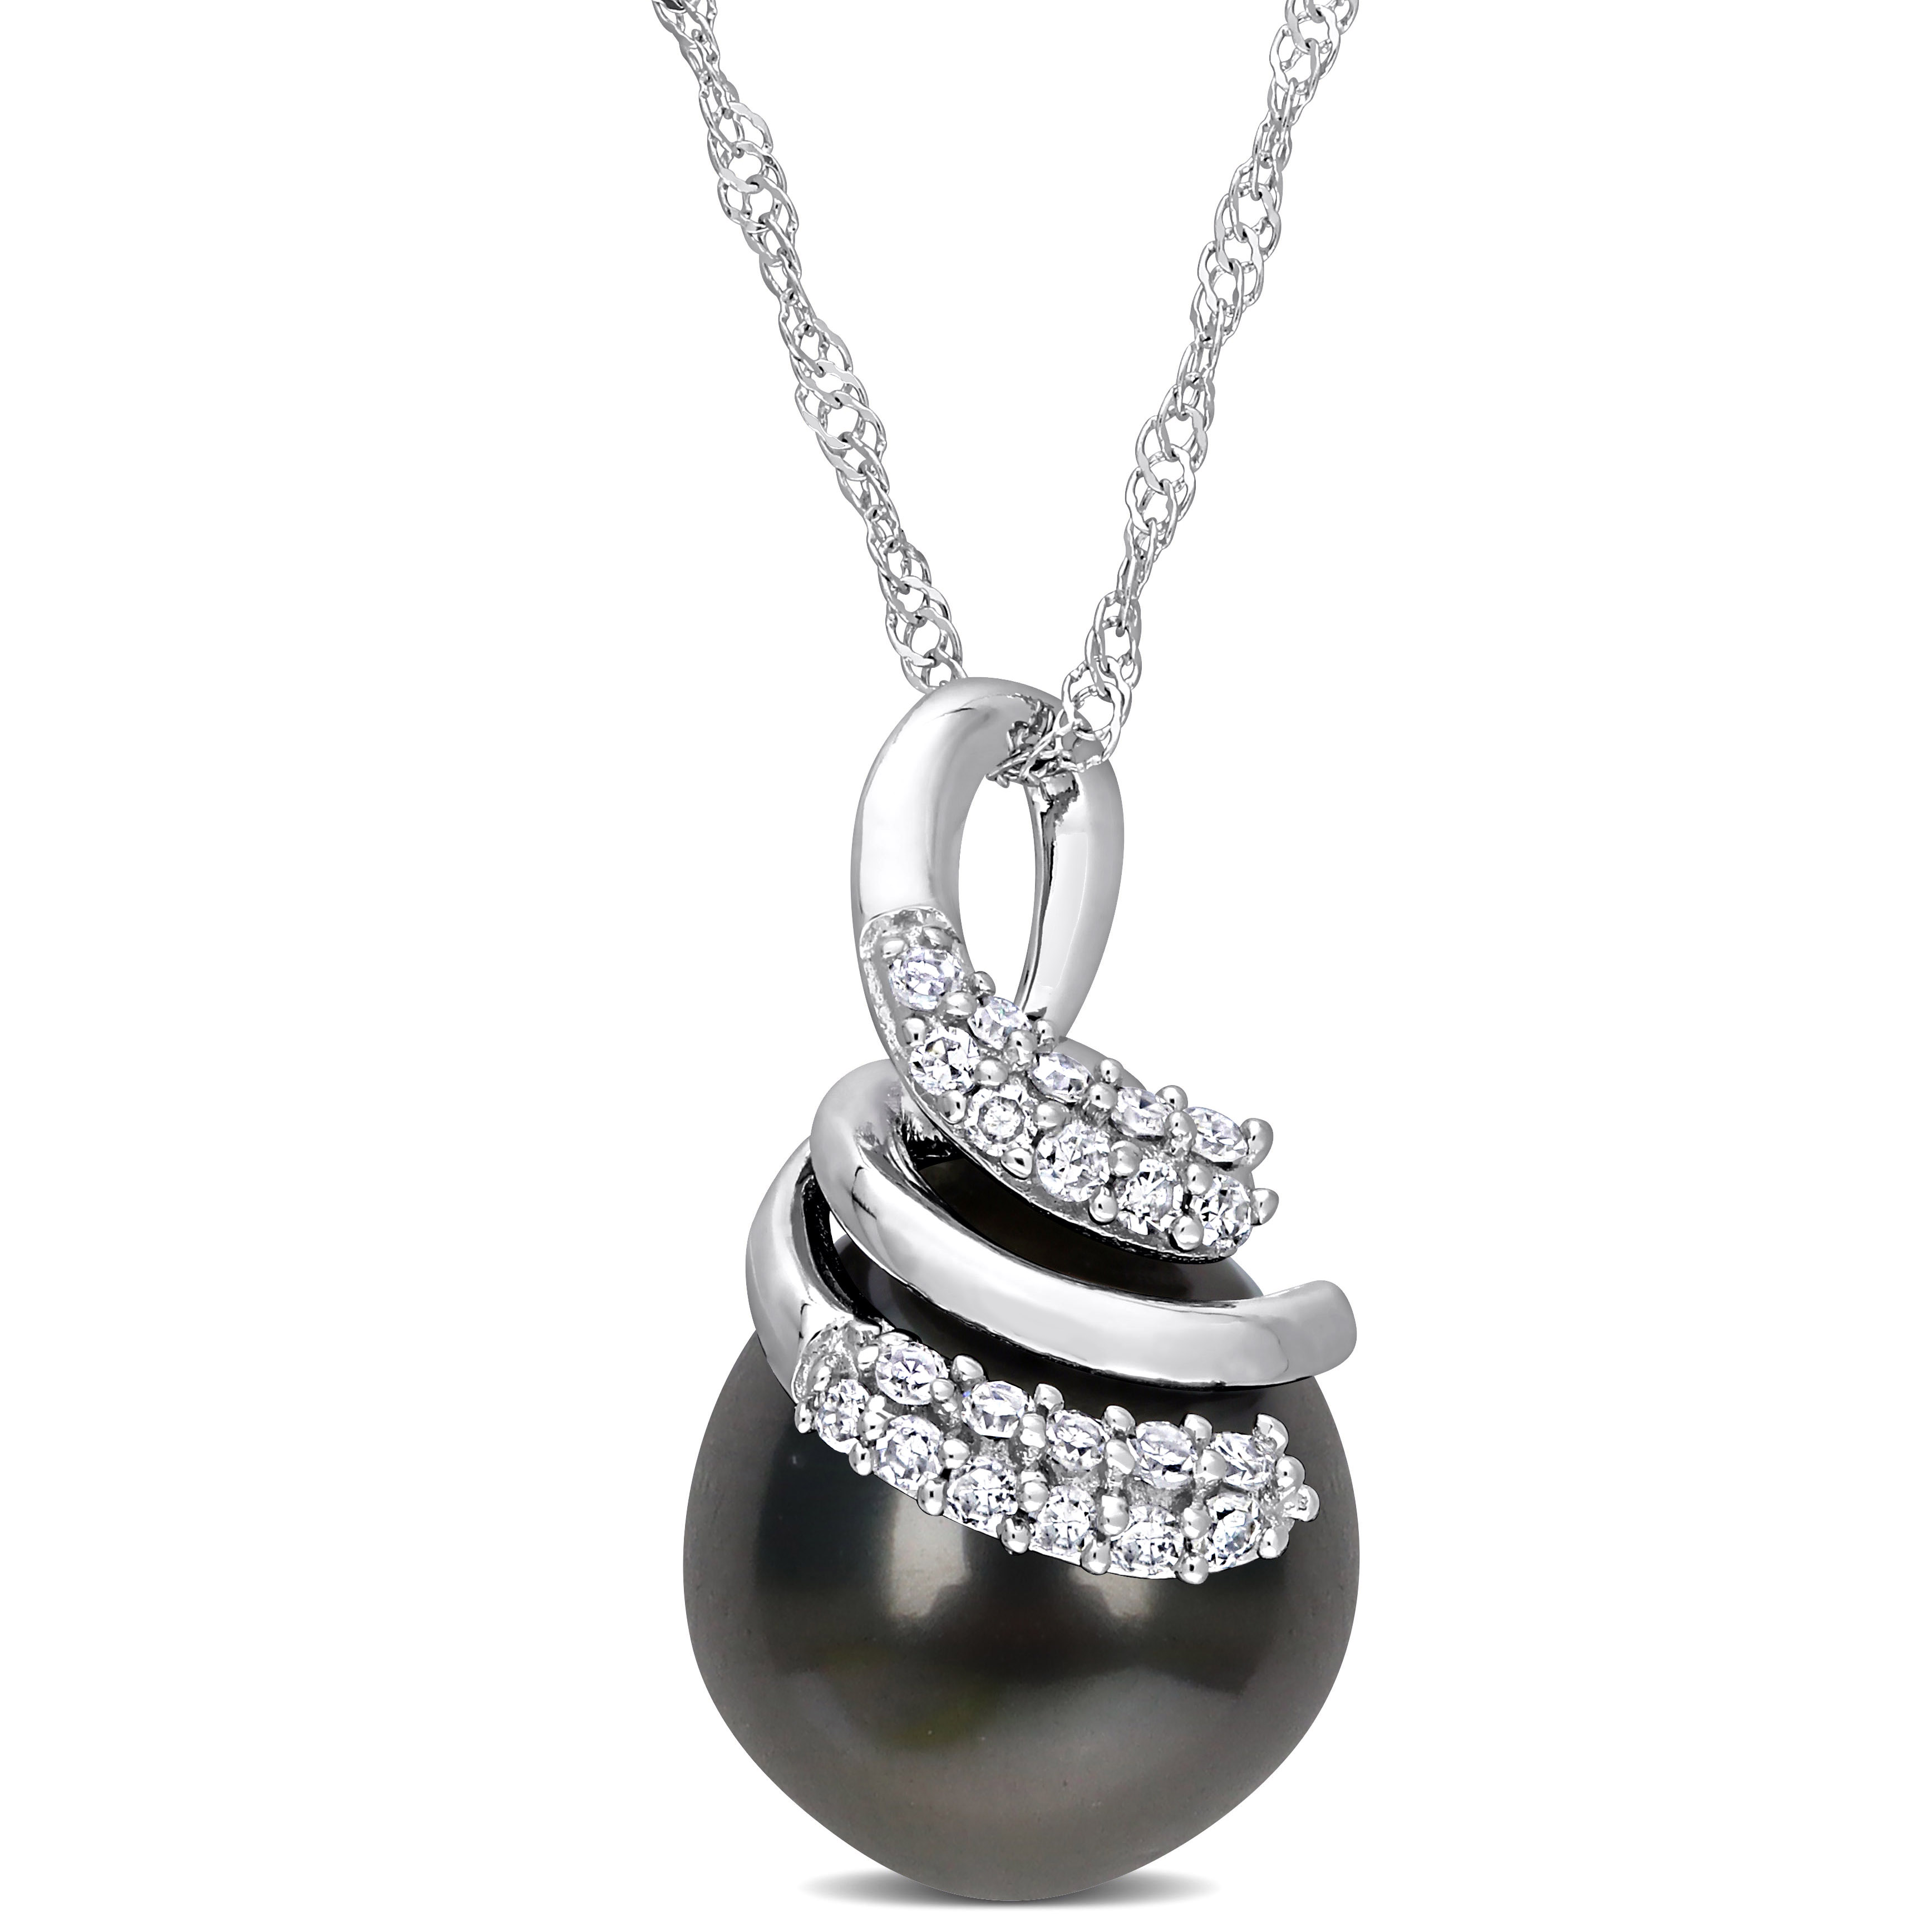 9-10 MM Black Tahitian Cultured Pearl & 1/10 CT TW Diamond Swirl Pendant with Chain in 14k White Gold